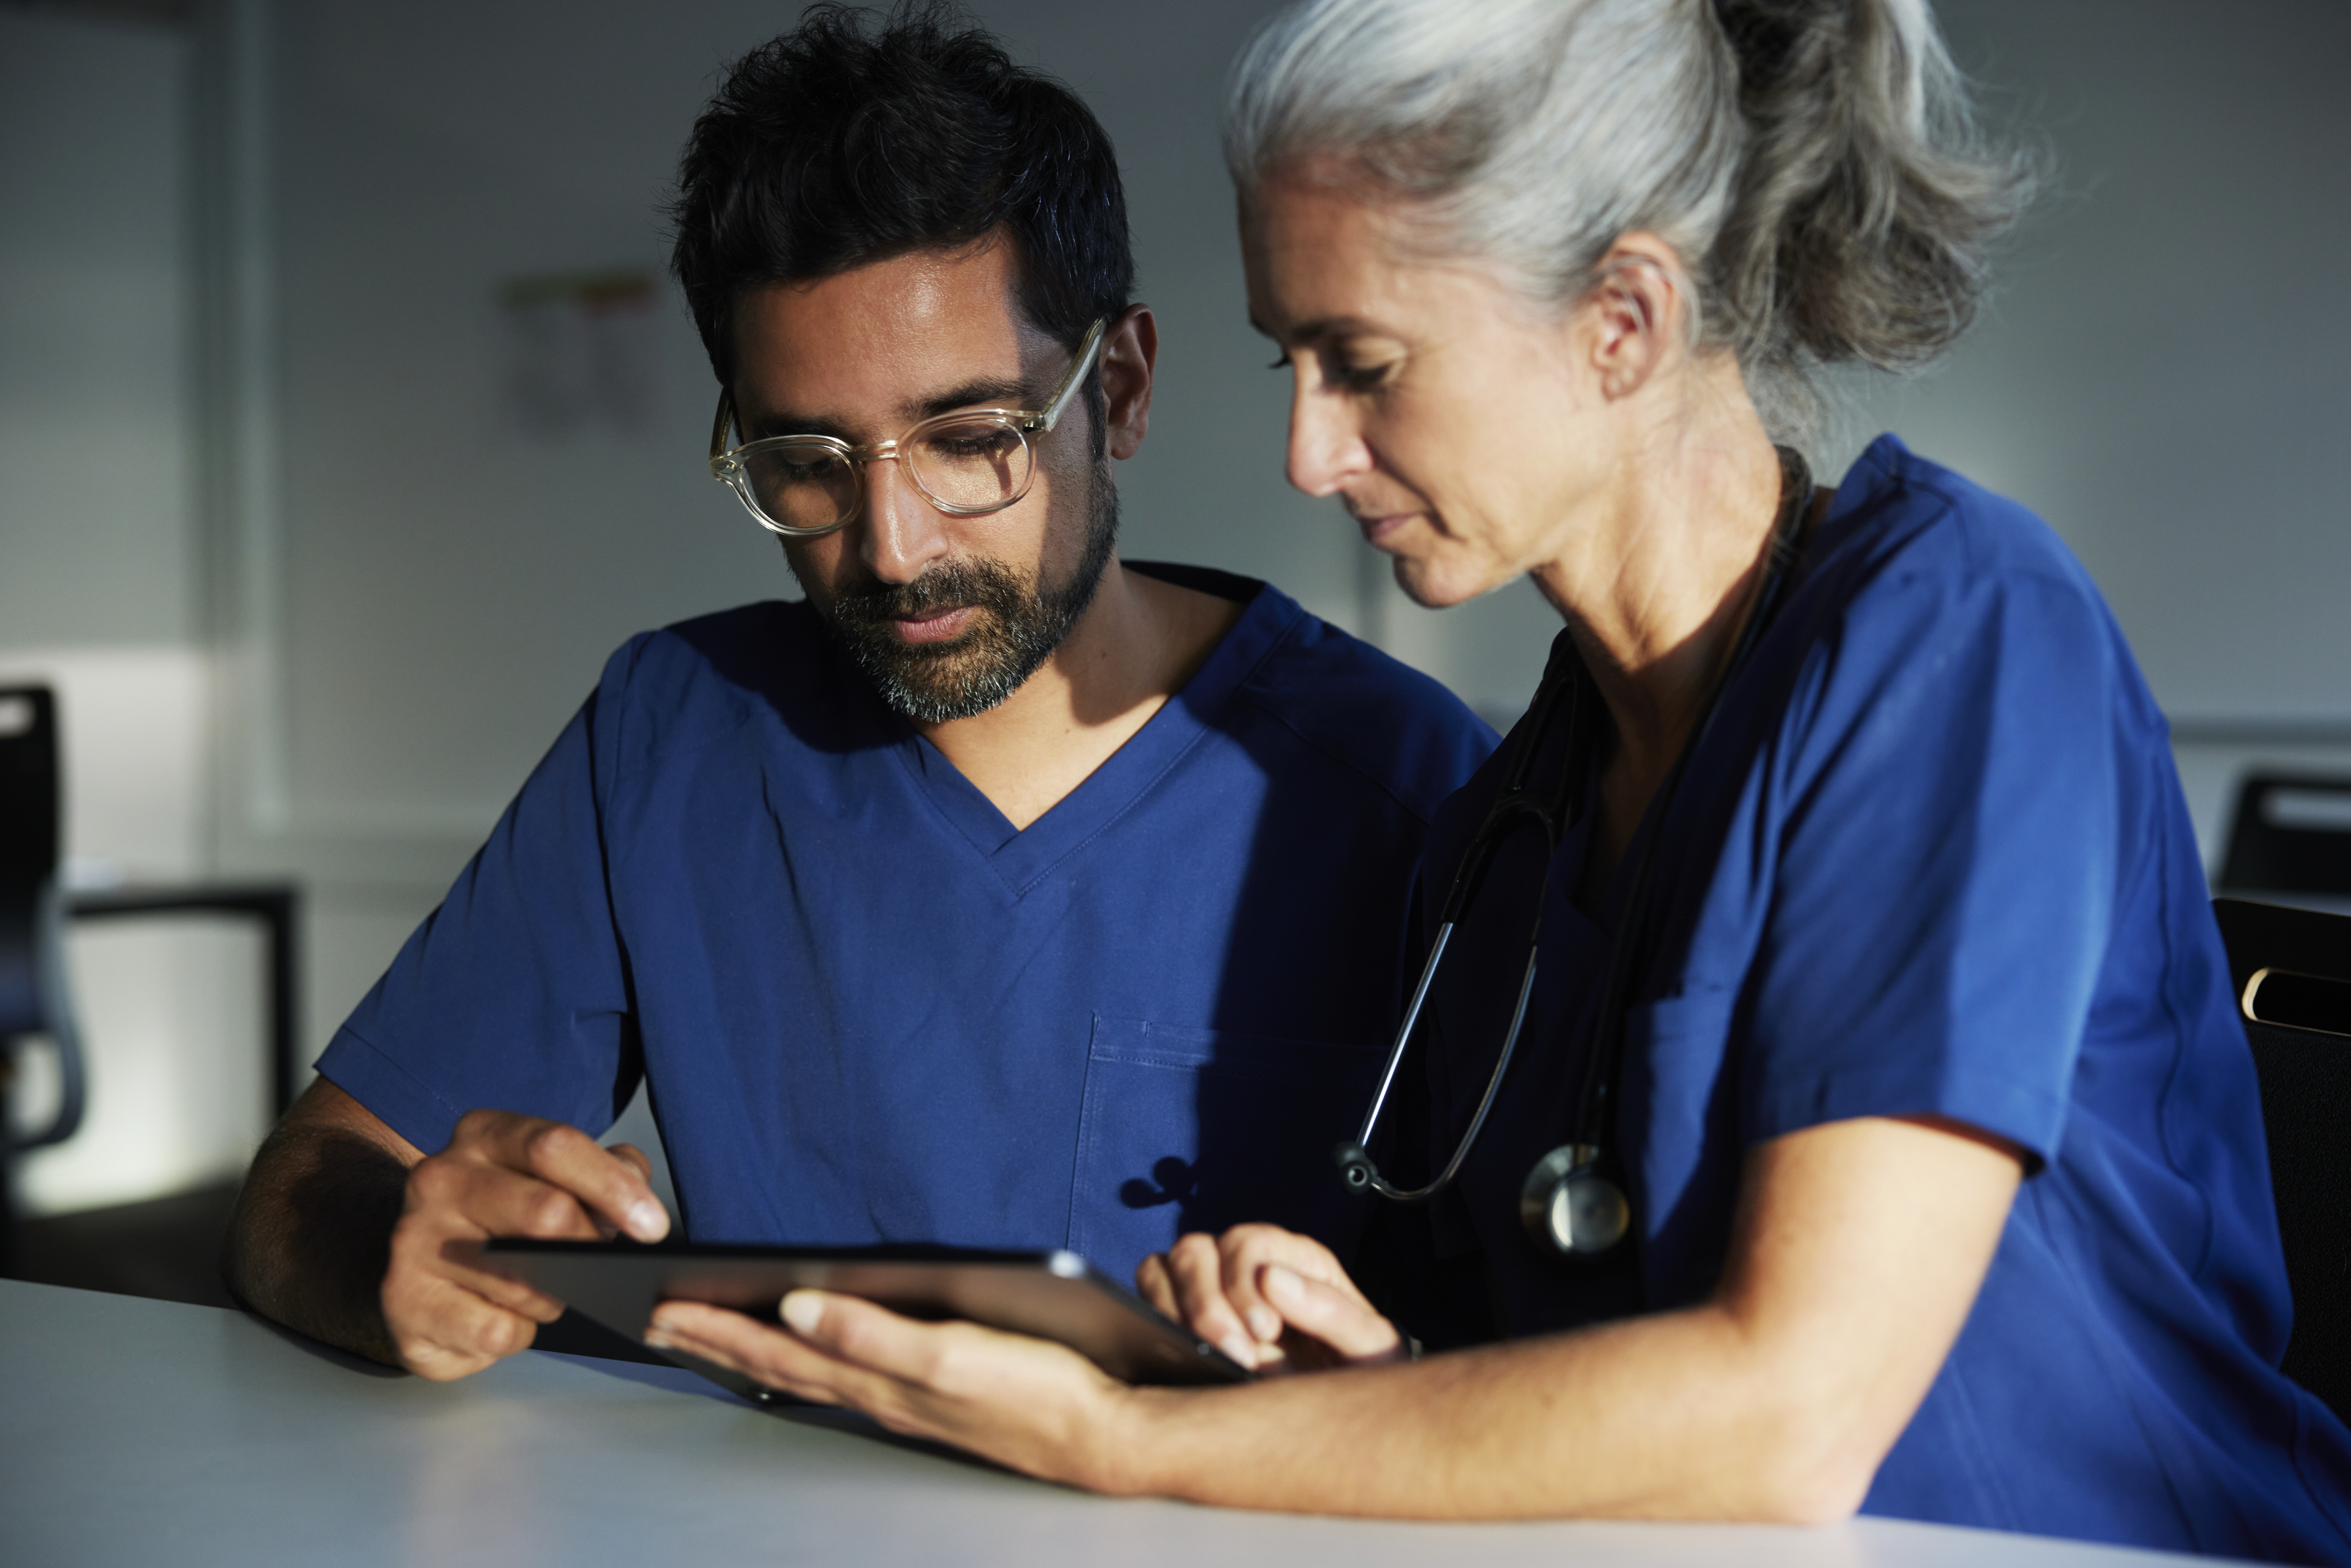 A doctor and nurse looking over files | Source: Getty Images